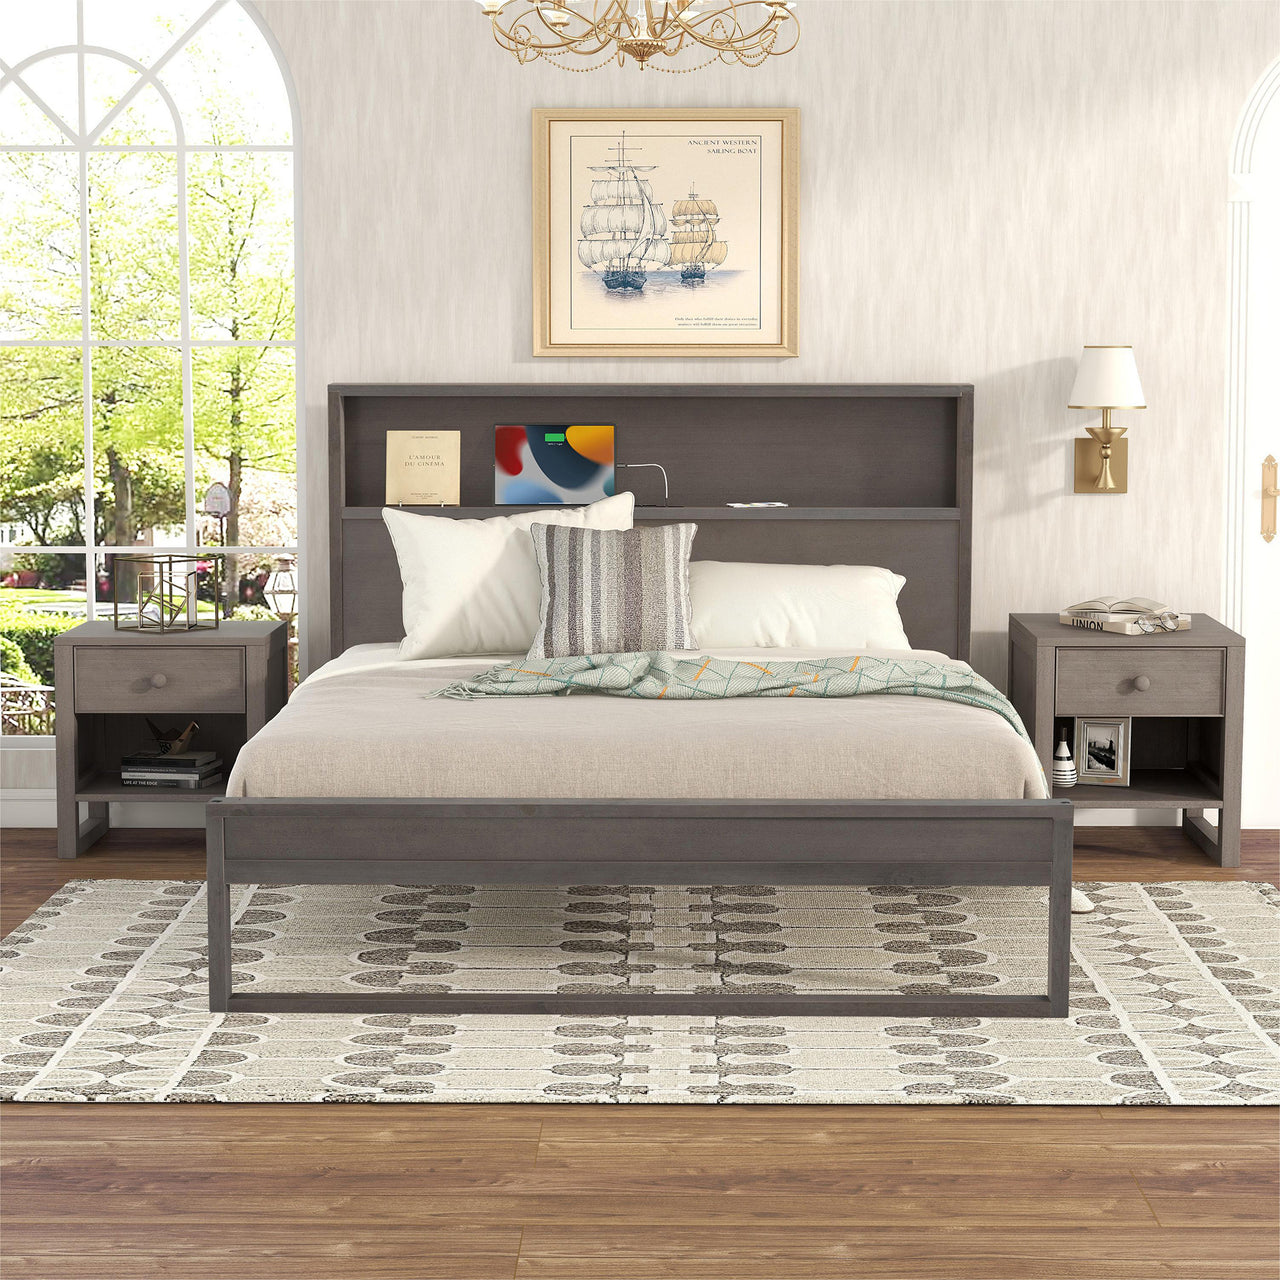 3-Pieces Bedroom Sets Queen Size Platform Bed with Two Nightstands,Antique Gray